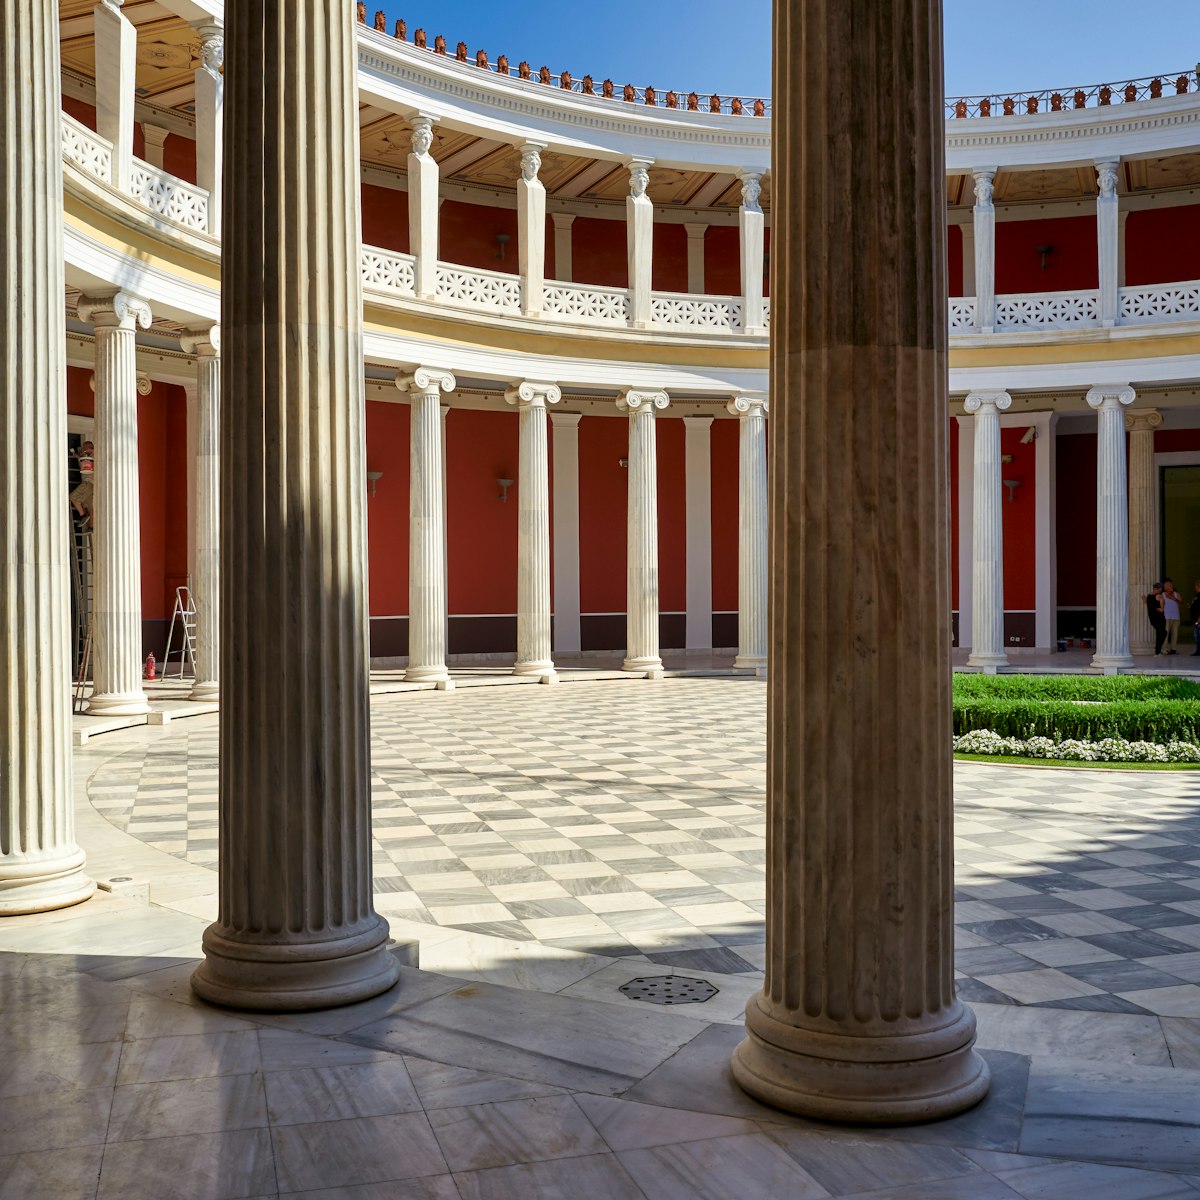 Athens Greece. The inner courtyard of the Zappeio Hall, now used as a conference center. Athens Greece June 2019; Shutterstock ID 1587006739; your: Erin Lenczycki; gl: 65050; netsuite: Digital; full: POI
1587006739